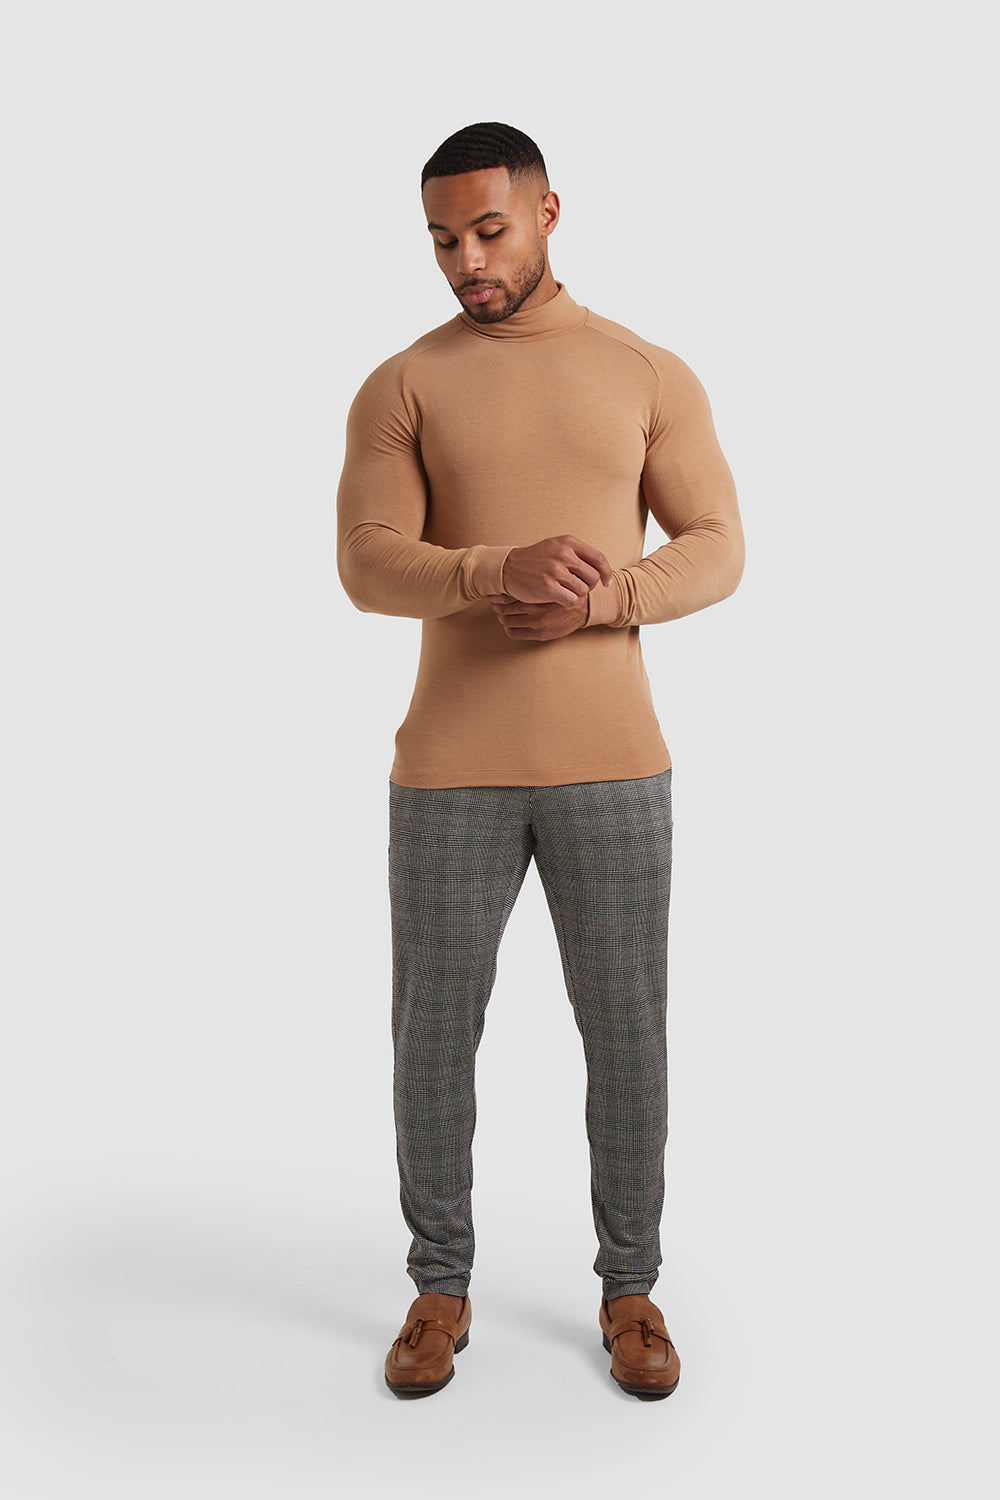 Knitted pure cashmere rollneck camel - Blugiallo